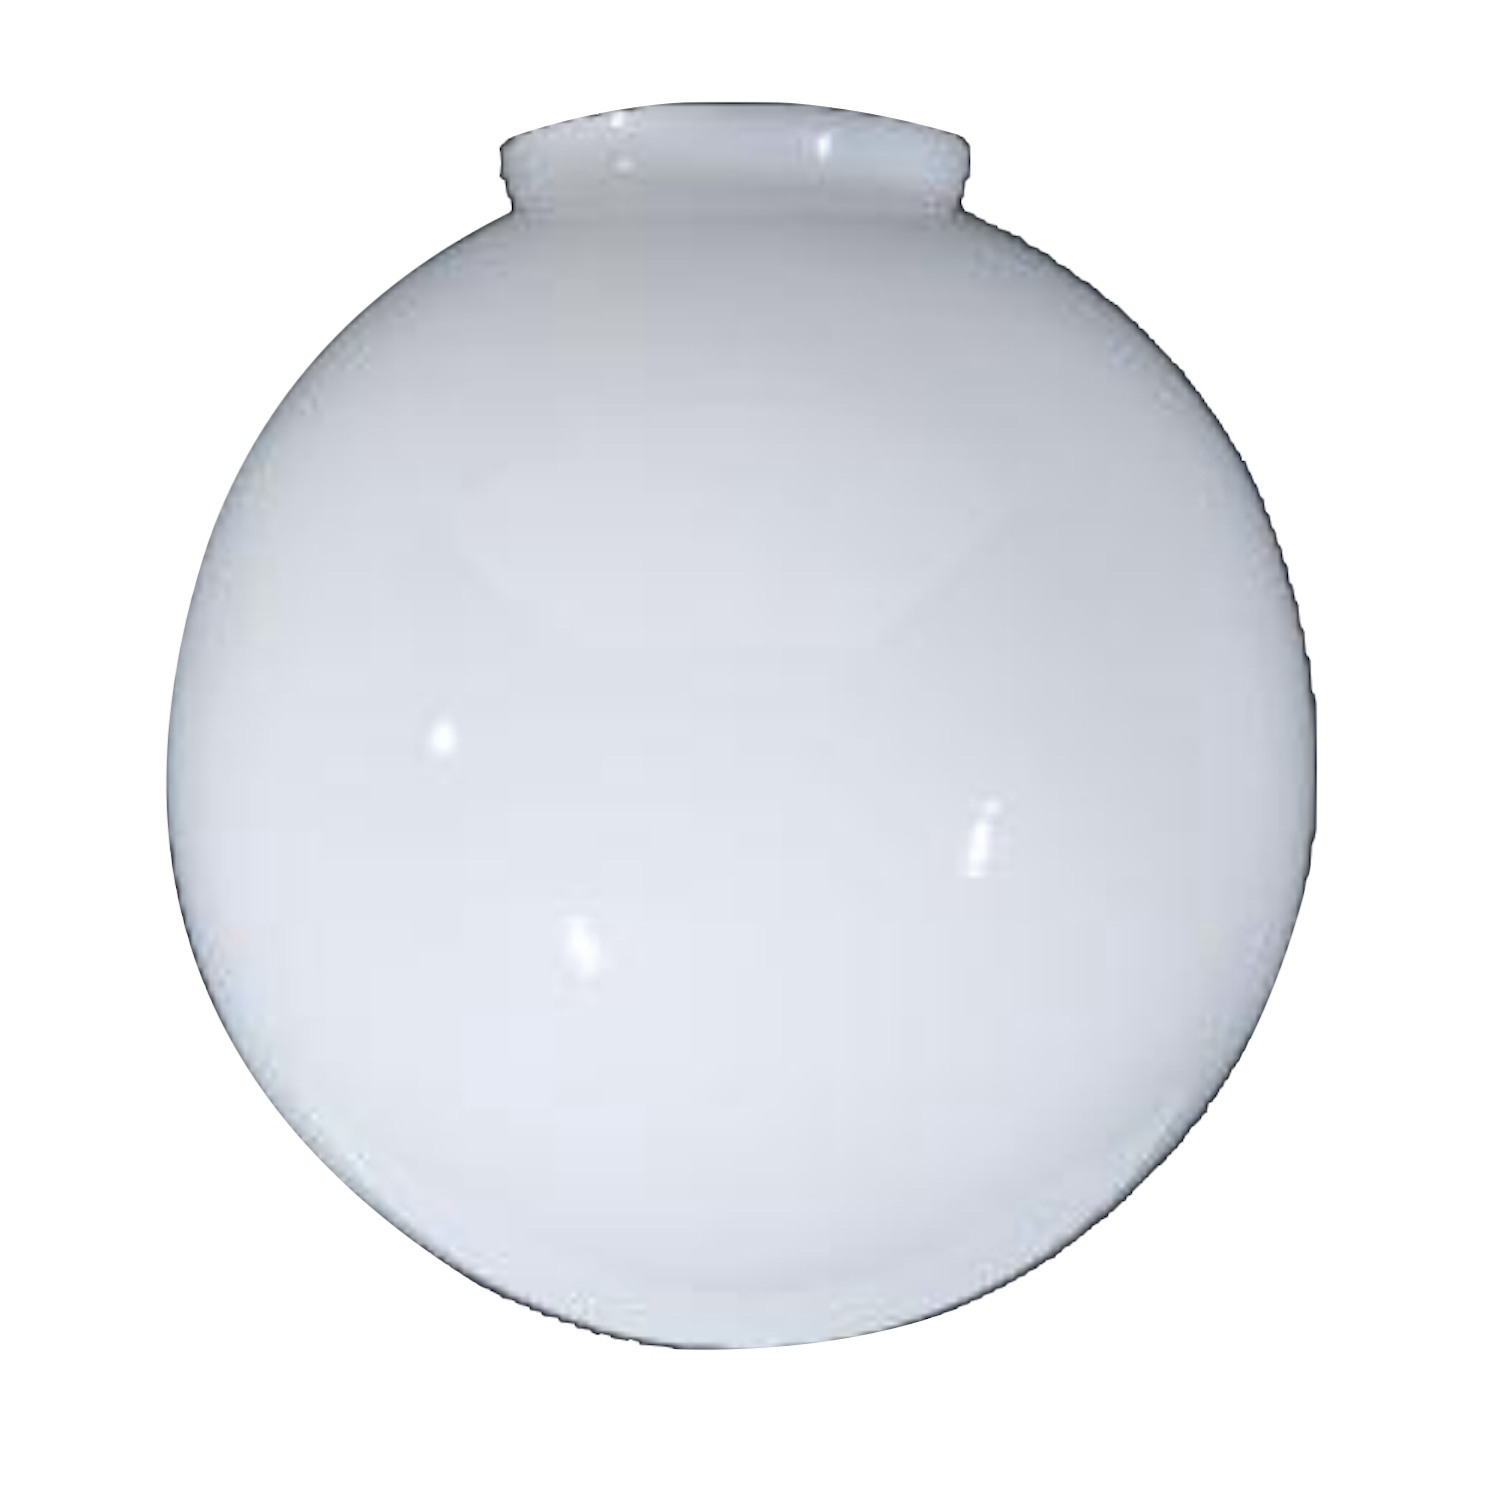 White Milk Glass Round 6/" Globe Light Lamp Shade Cover Replace 3 1//8 Fitter